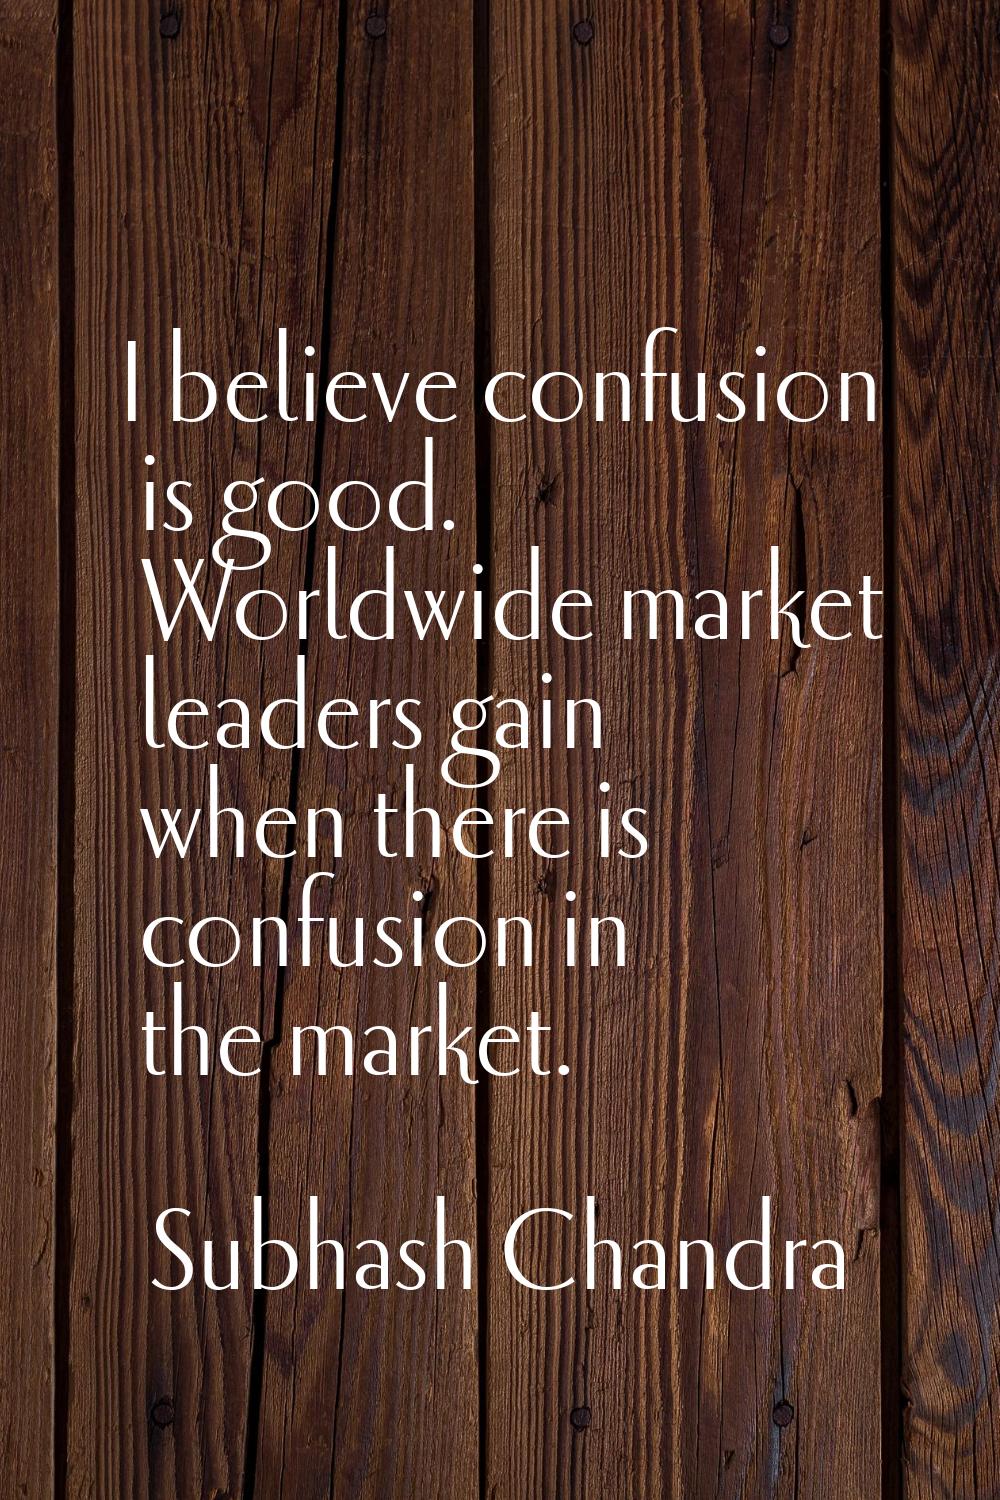 I believe confusion is good. Worldwide market leaders gain when there is confusion in the market.